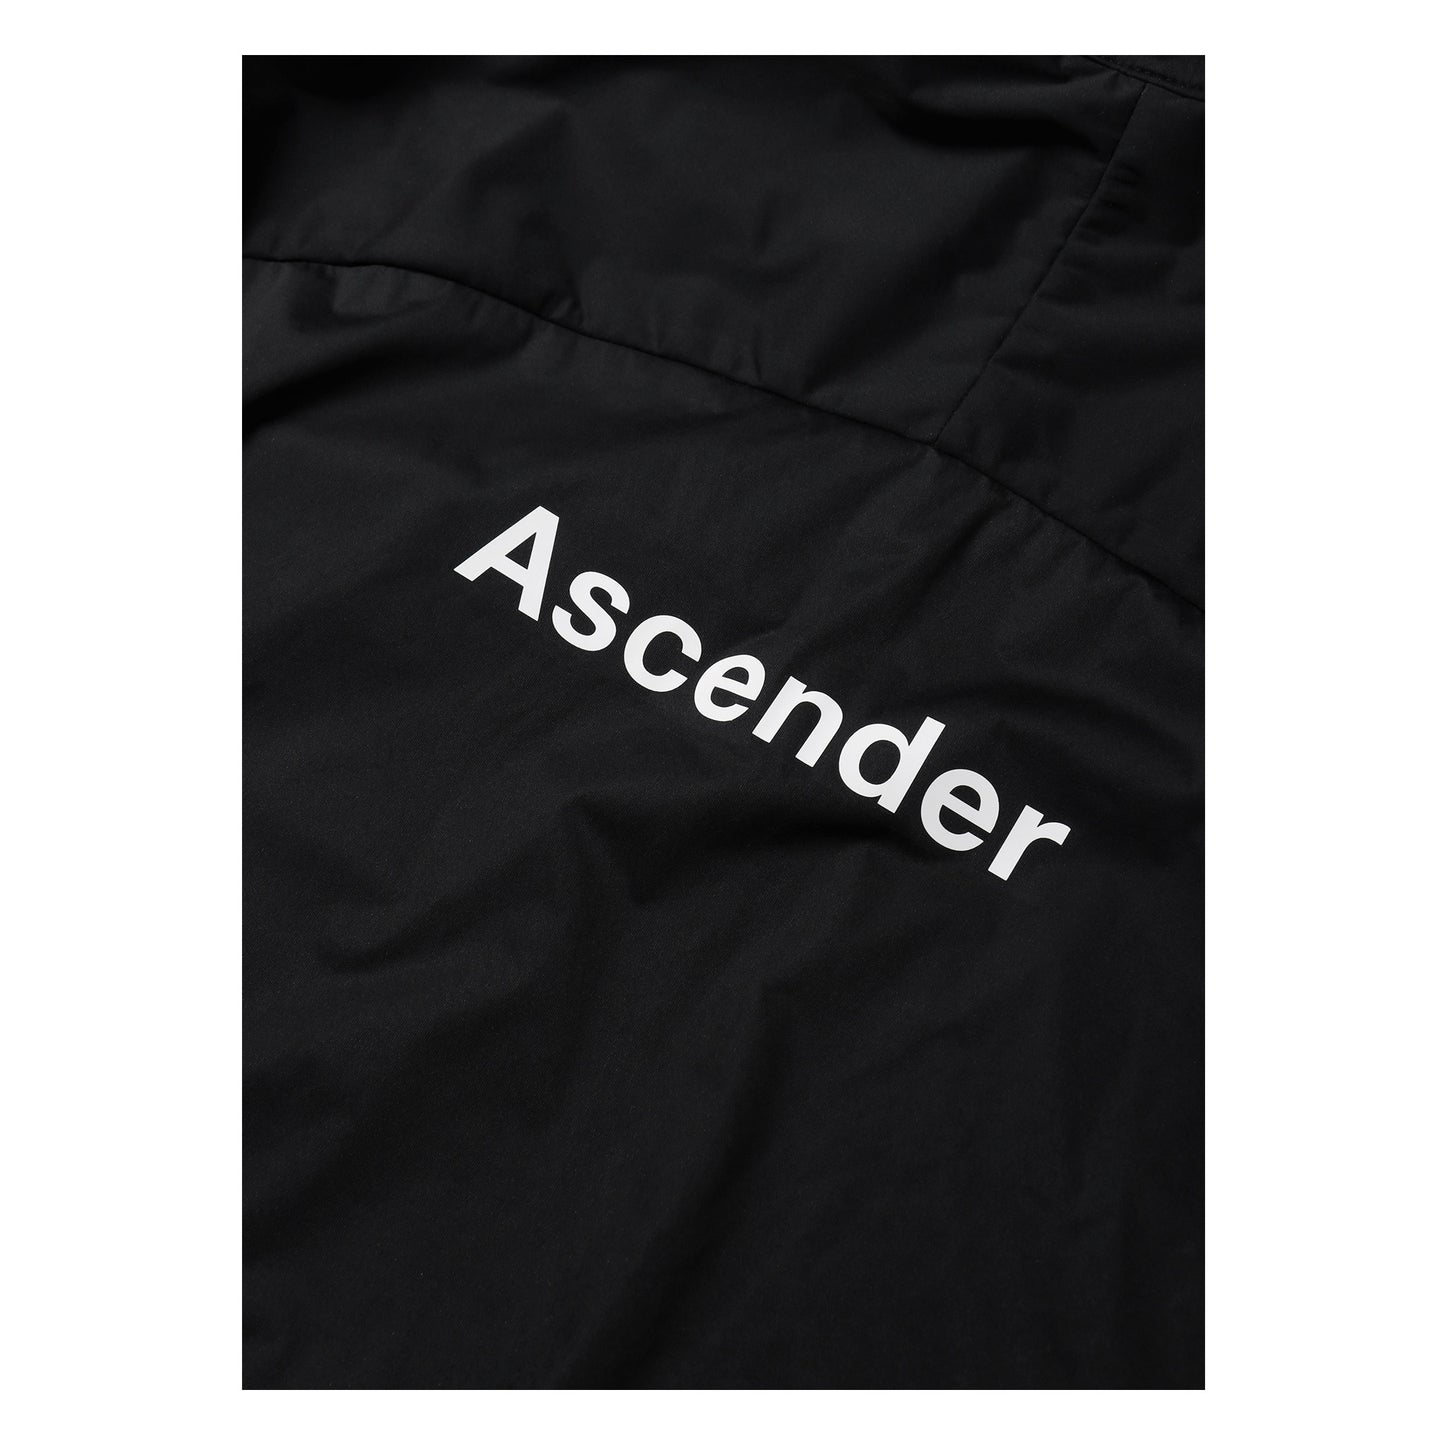 Aquarius Windproof and Waterproof Shield Jacket from Ascender Cycling Club in Zürich Switzerland Back Logo View